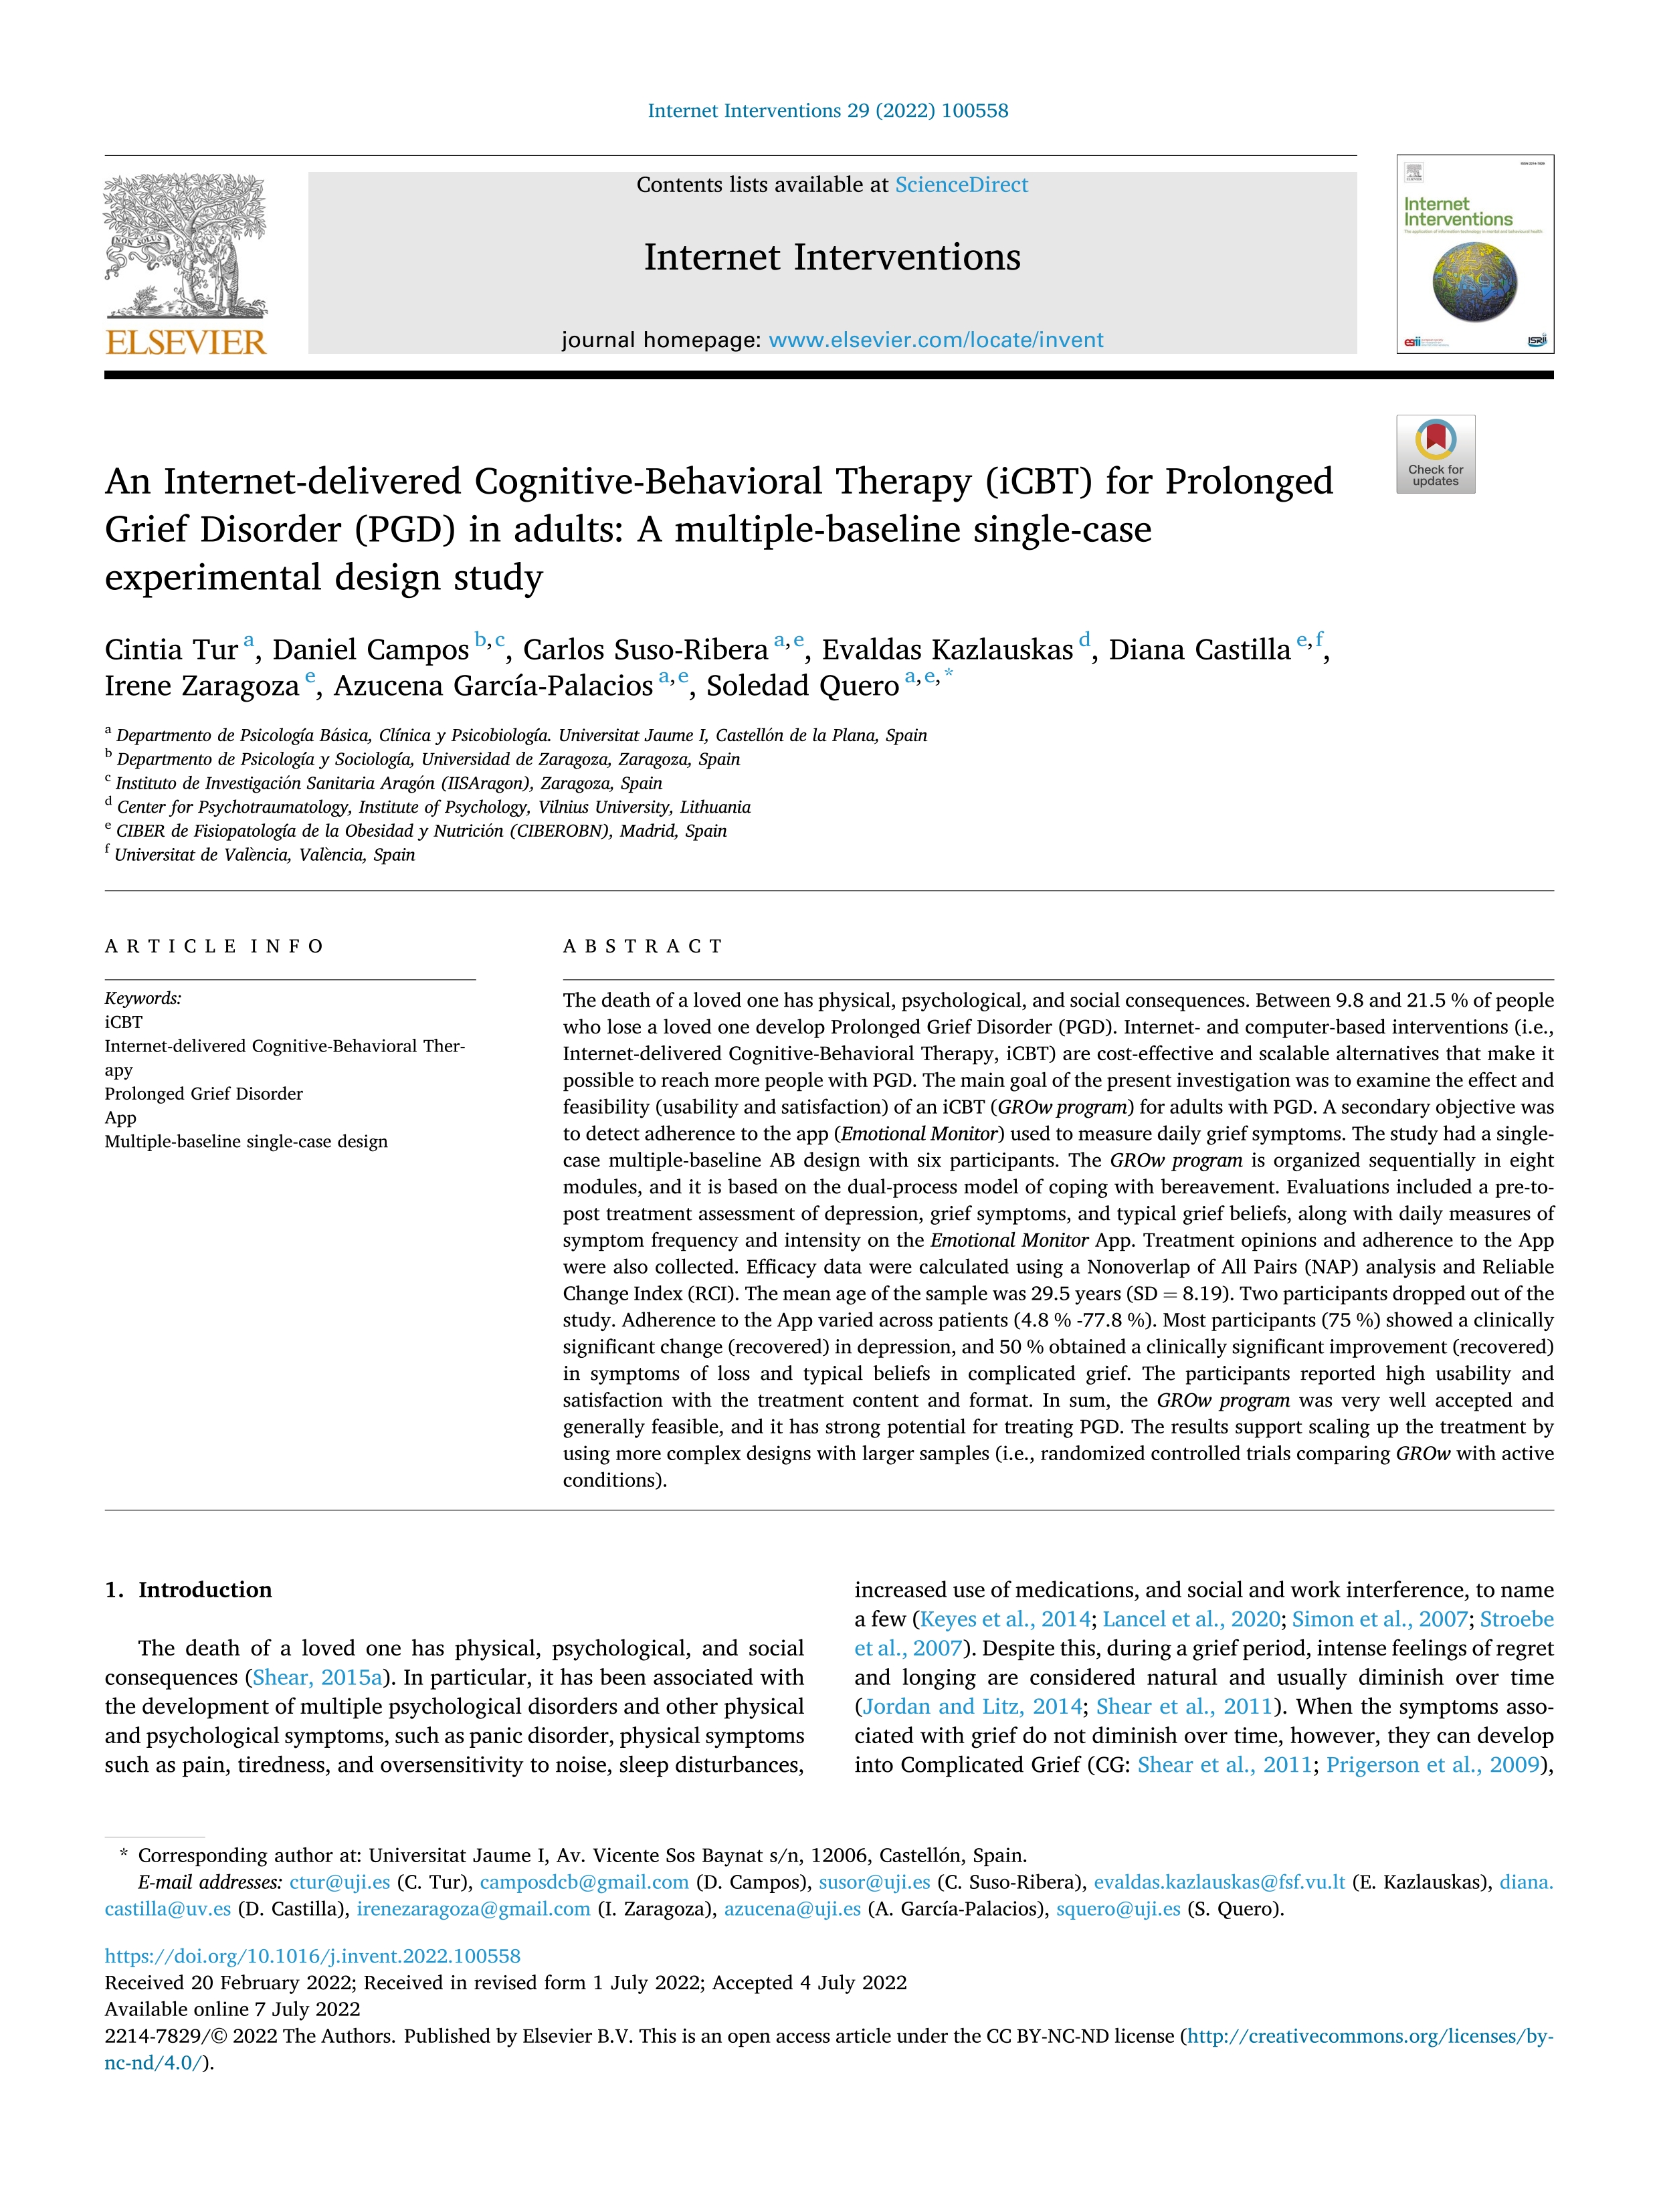 An Internet-delivered Cognitive-Behavioral Therapy (iCBT) for Prolonged Grief Disorder (PGD) in adults: A multiple-baseline single-case experimental design study